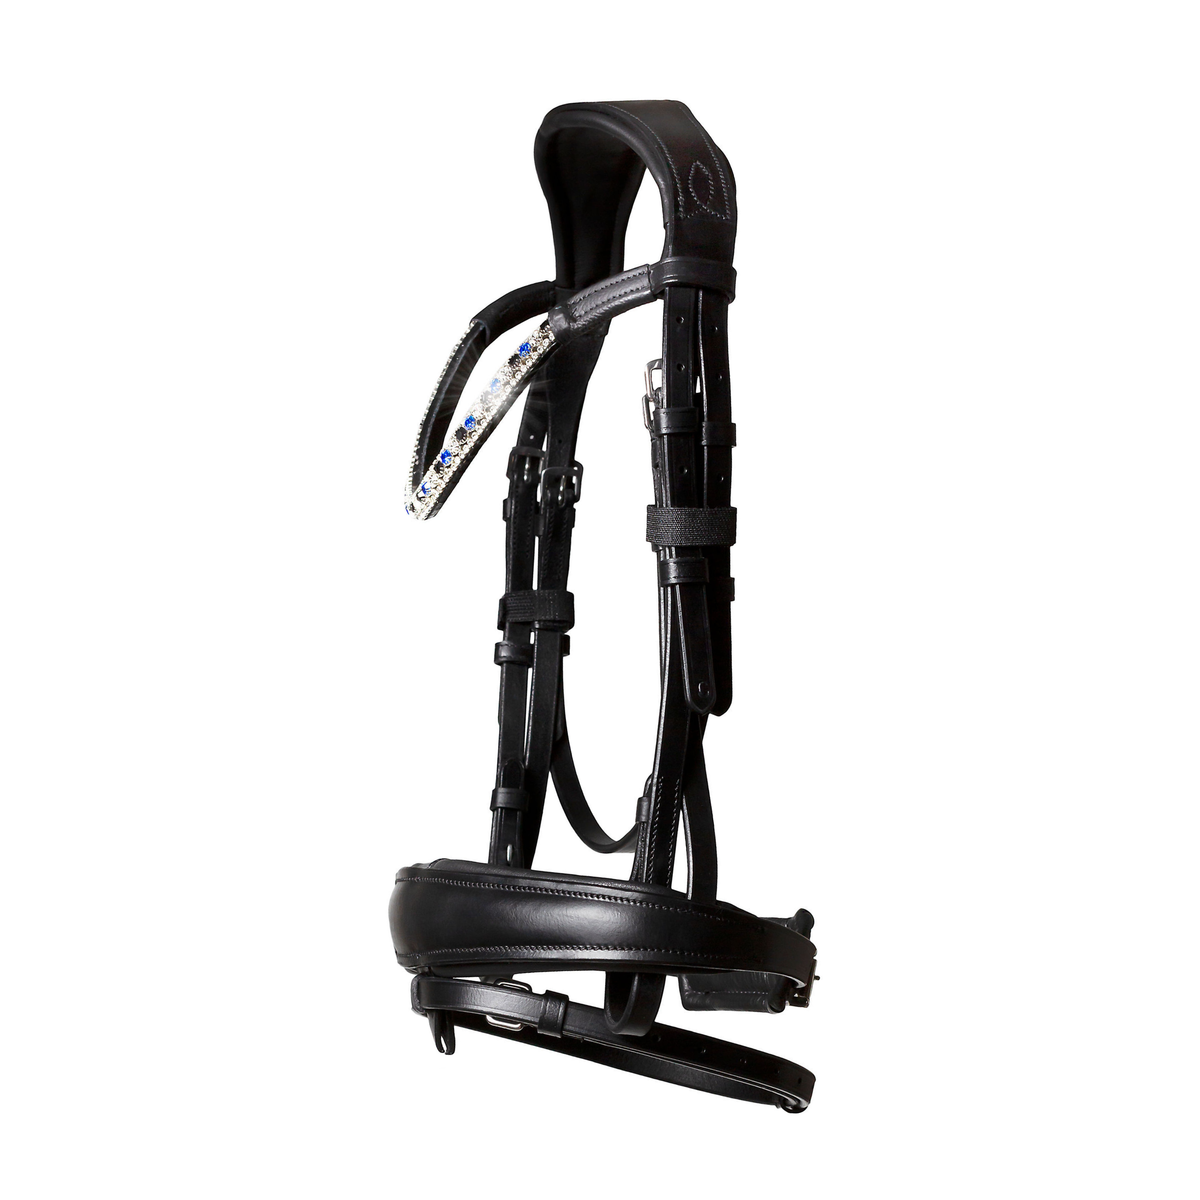 LUMIERE BRIDLES & STRAPPING BLACK / PONY / NAPPA LEATHER REINS Lumiere Anastasia Convertible Bridle